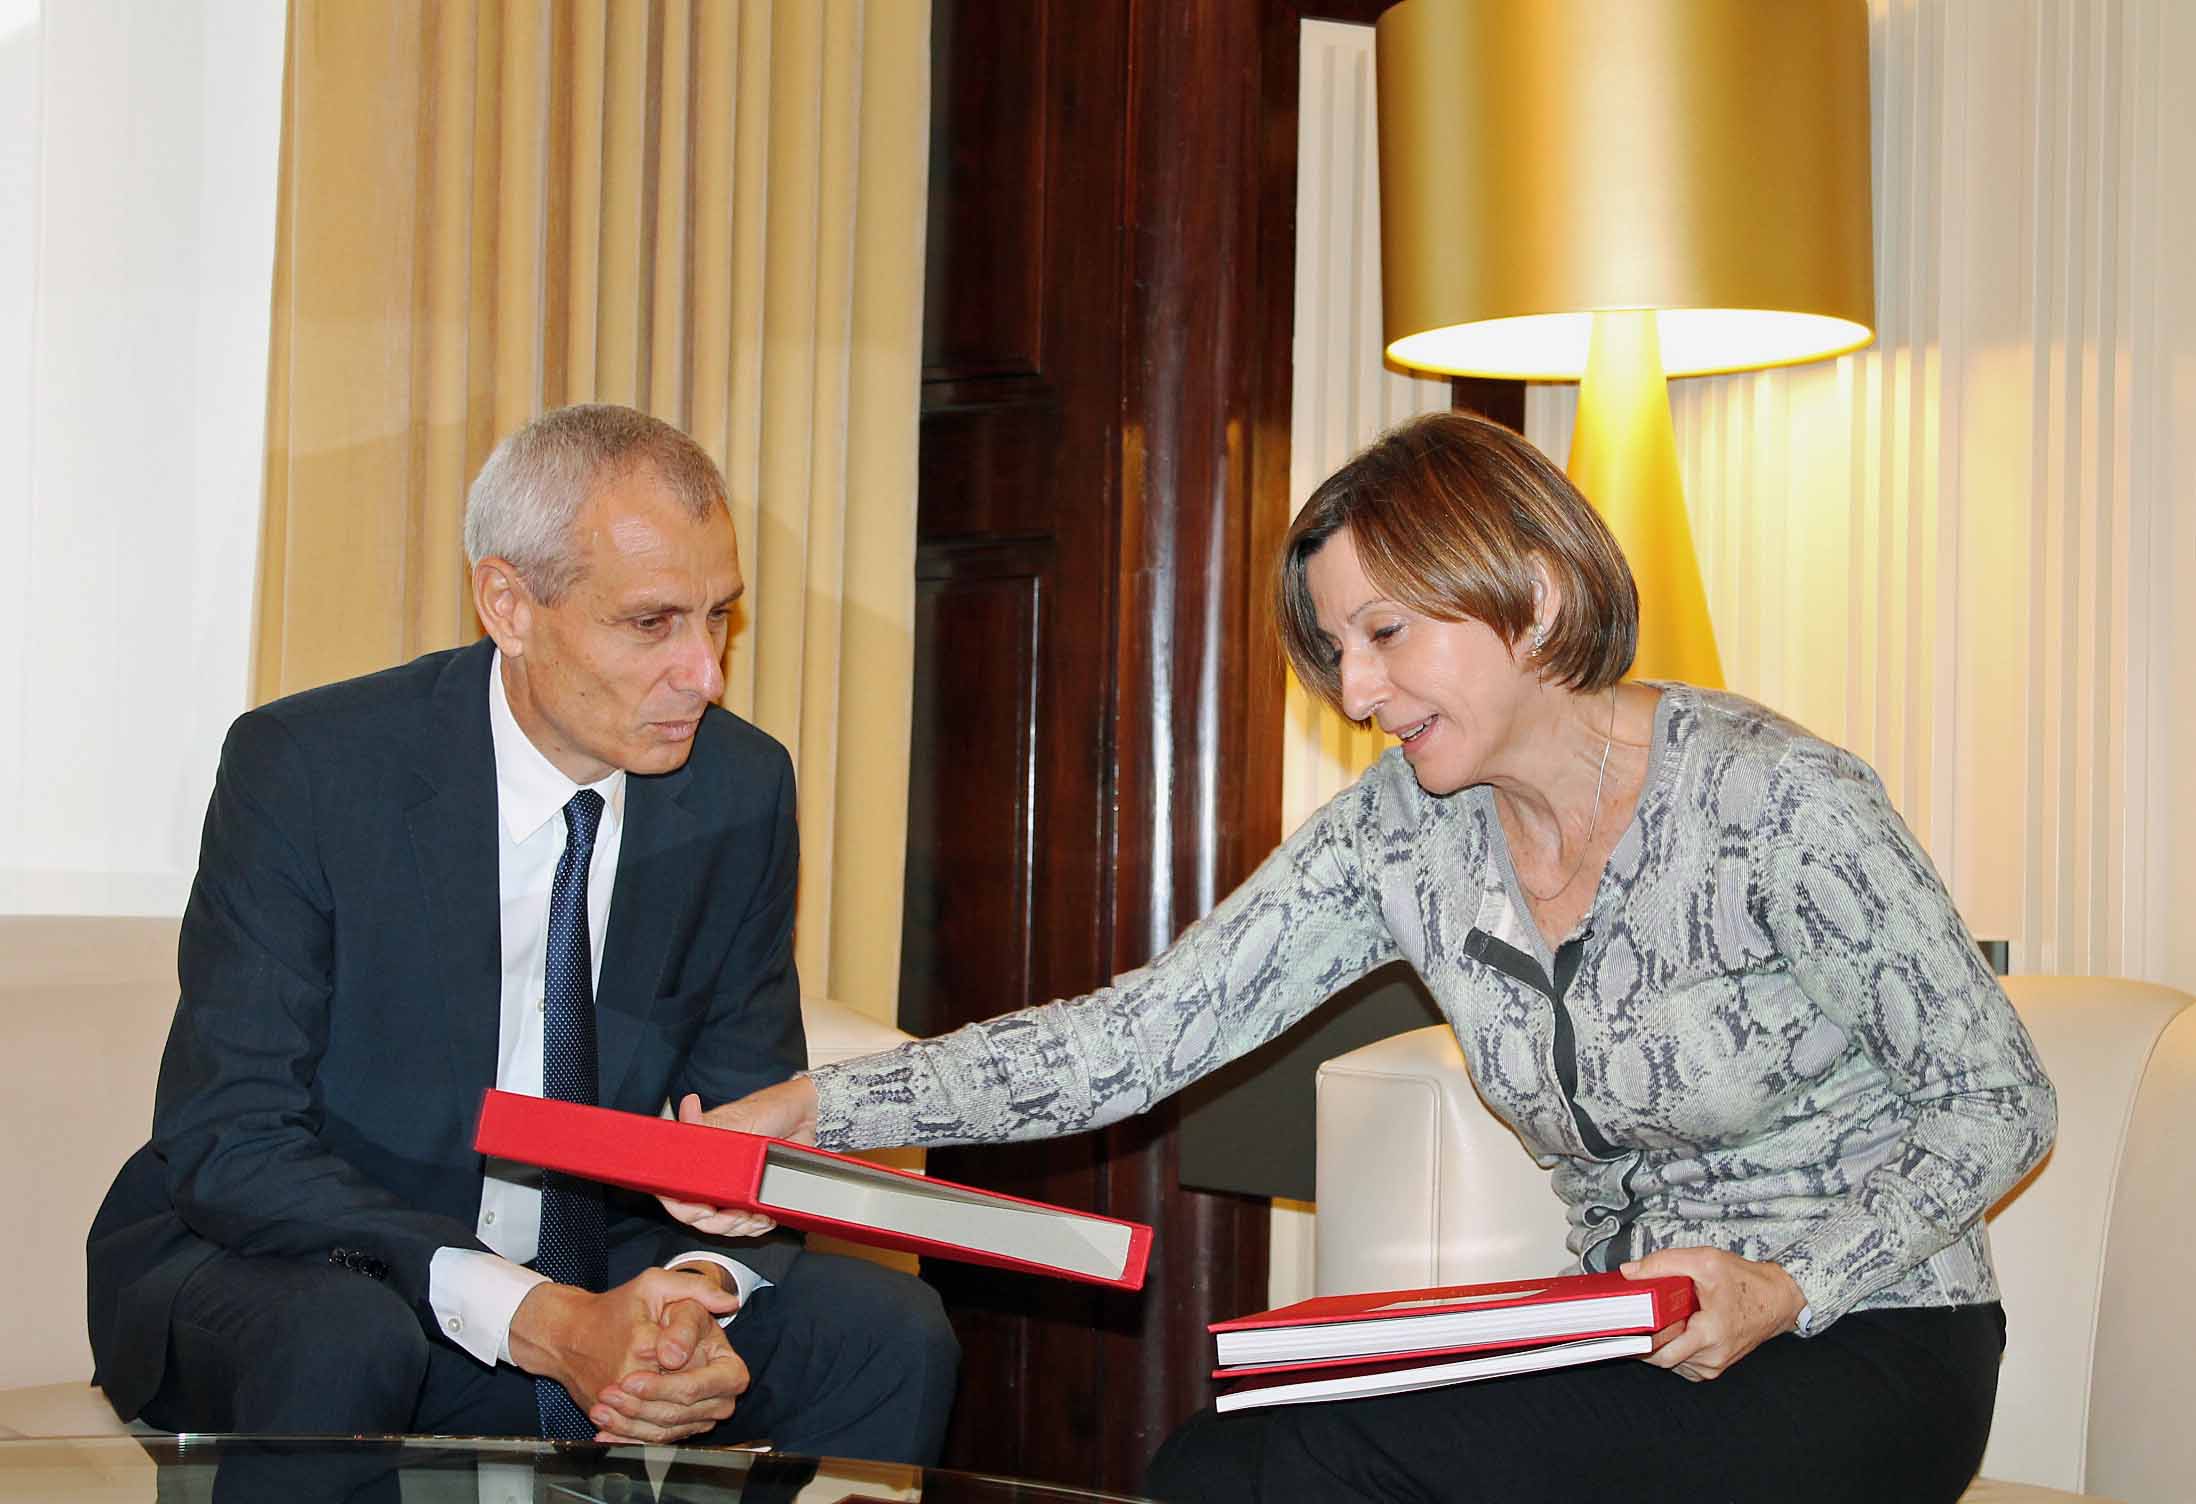 The Swiss ambassador to Spain, Thomas Kolly met this Friday with the Parliament's President, Carme Forcadell (by ACN)